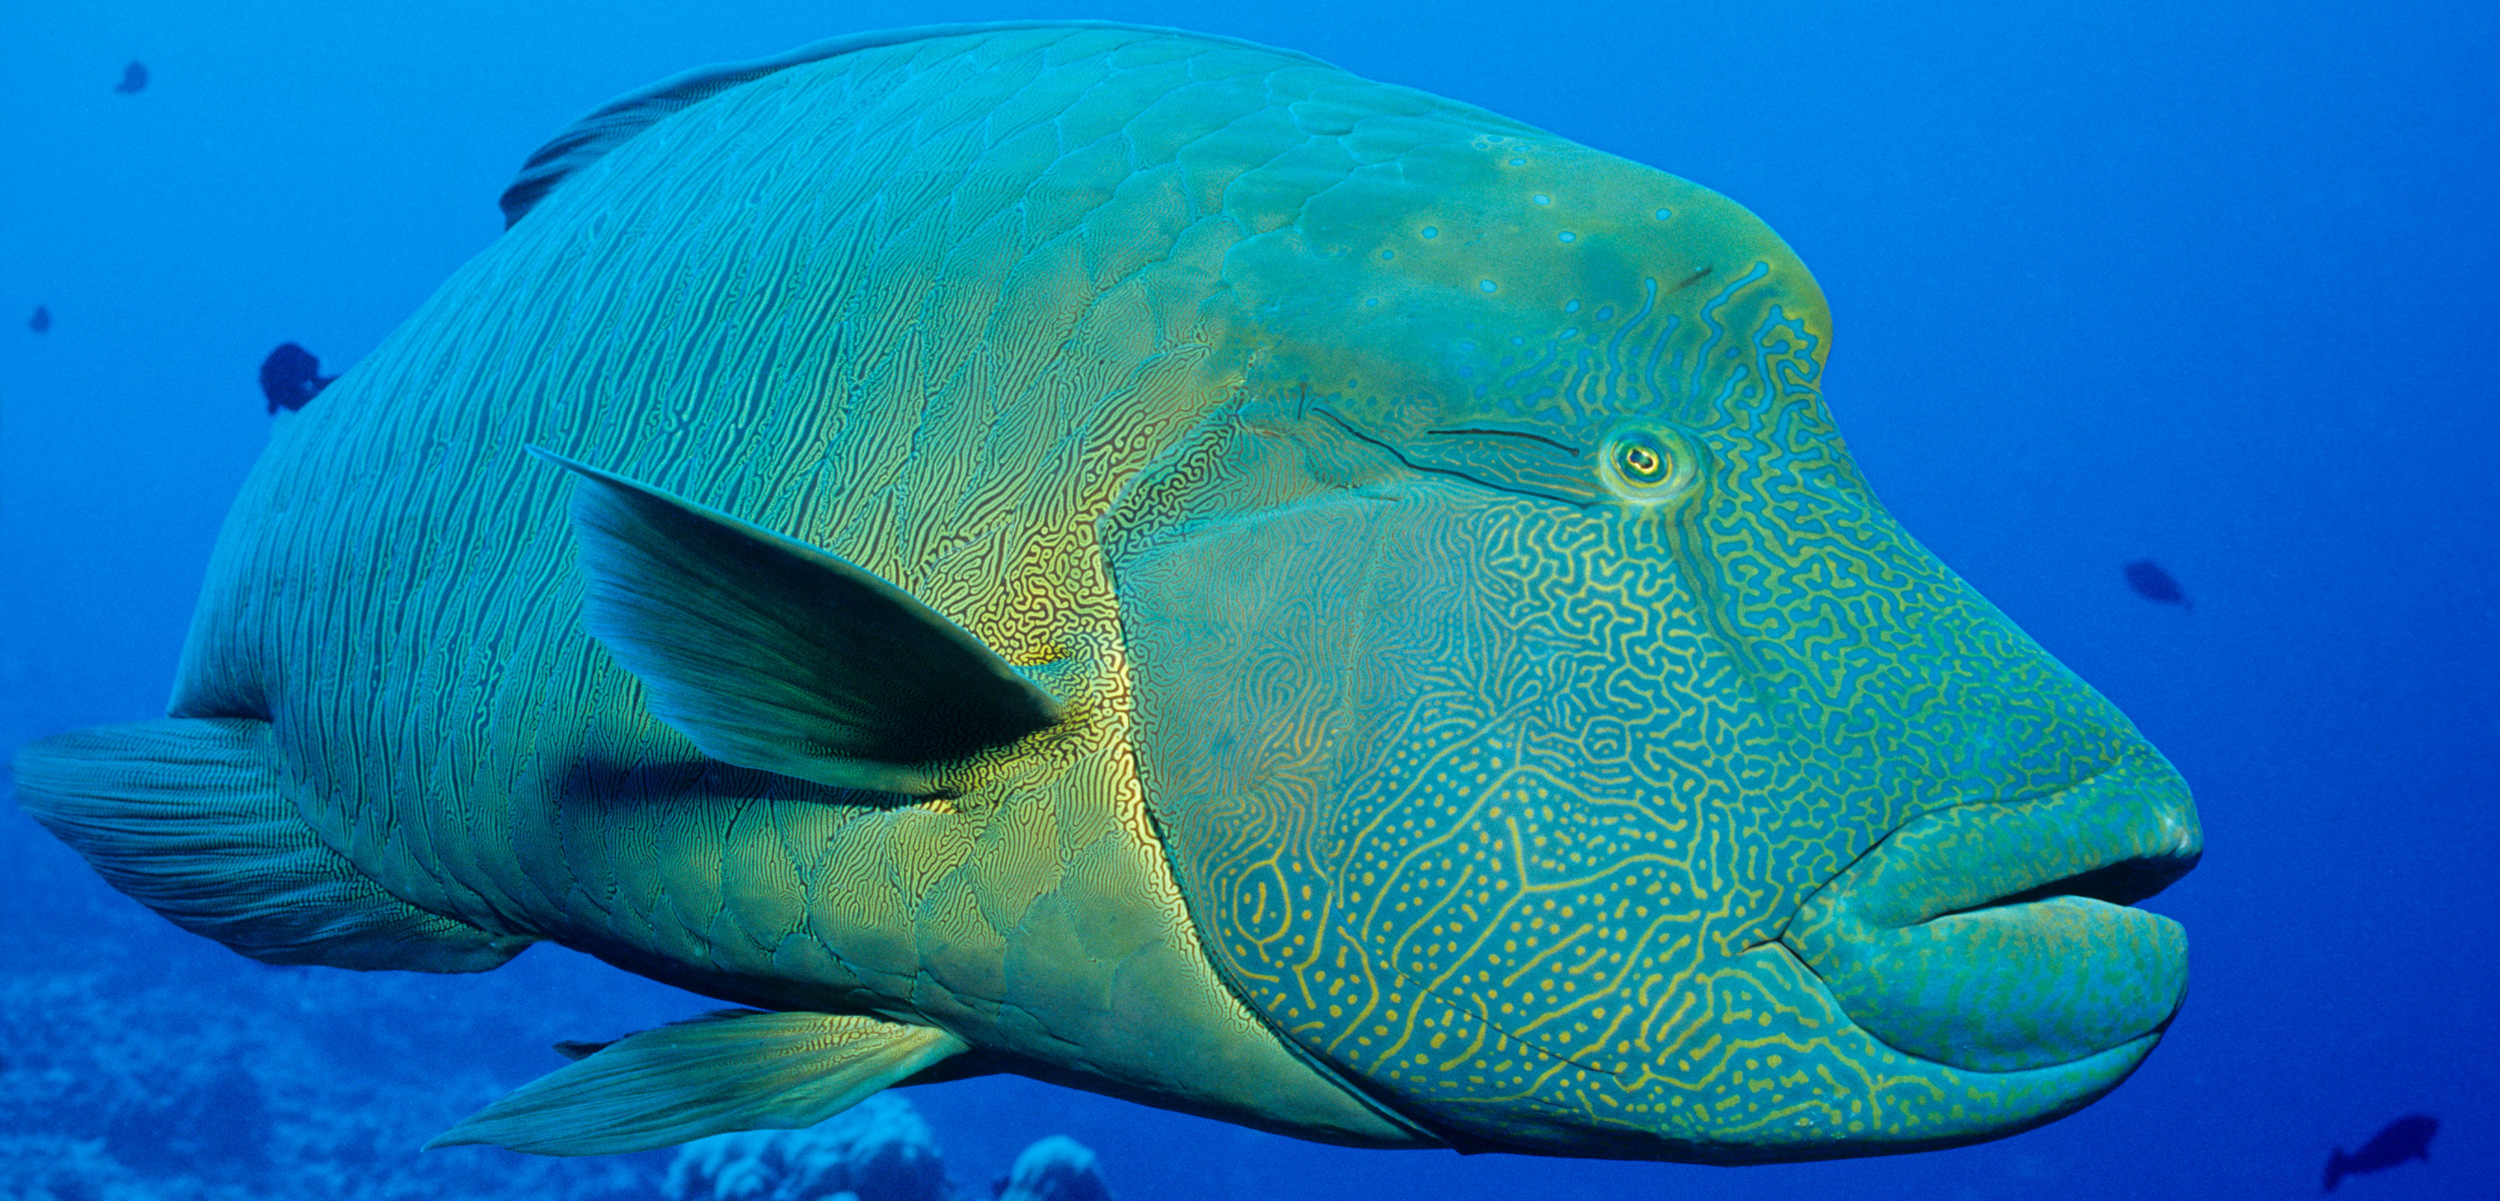 The Napoleon wrasse is a large reef fish from the Indo-Pacific region that’s prized as a high-status seafood dish in Hong Kong and Mainland China. Photo by WaterFrame/Alamy Stock Photo